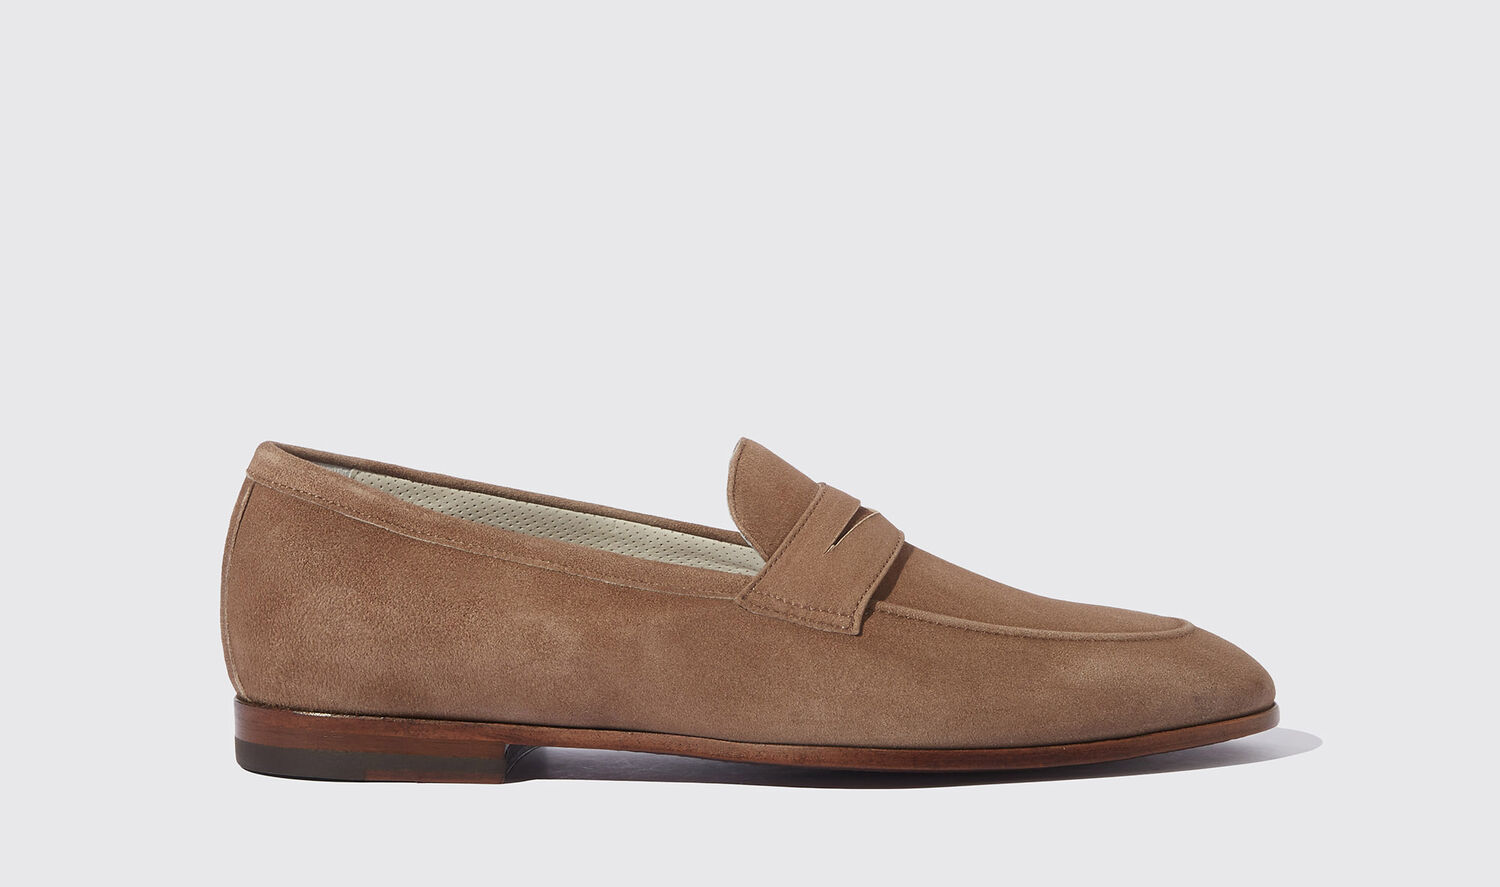 Scarosso Loafers Marzio Tabacco Scamosciato Suede Leather In Tobacco - Suede Leather